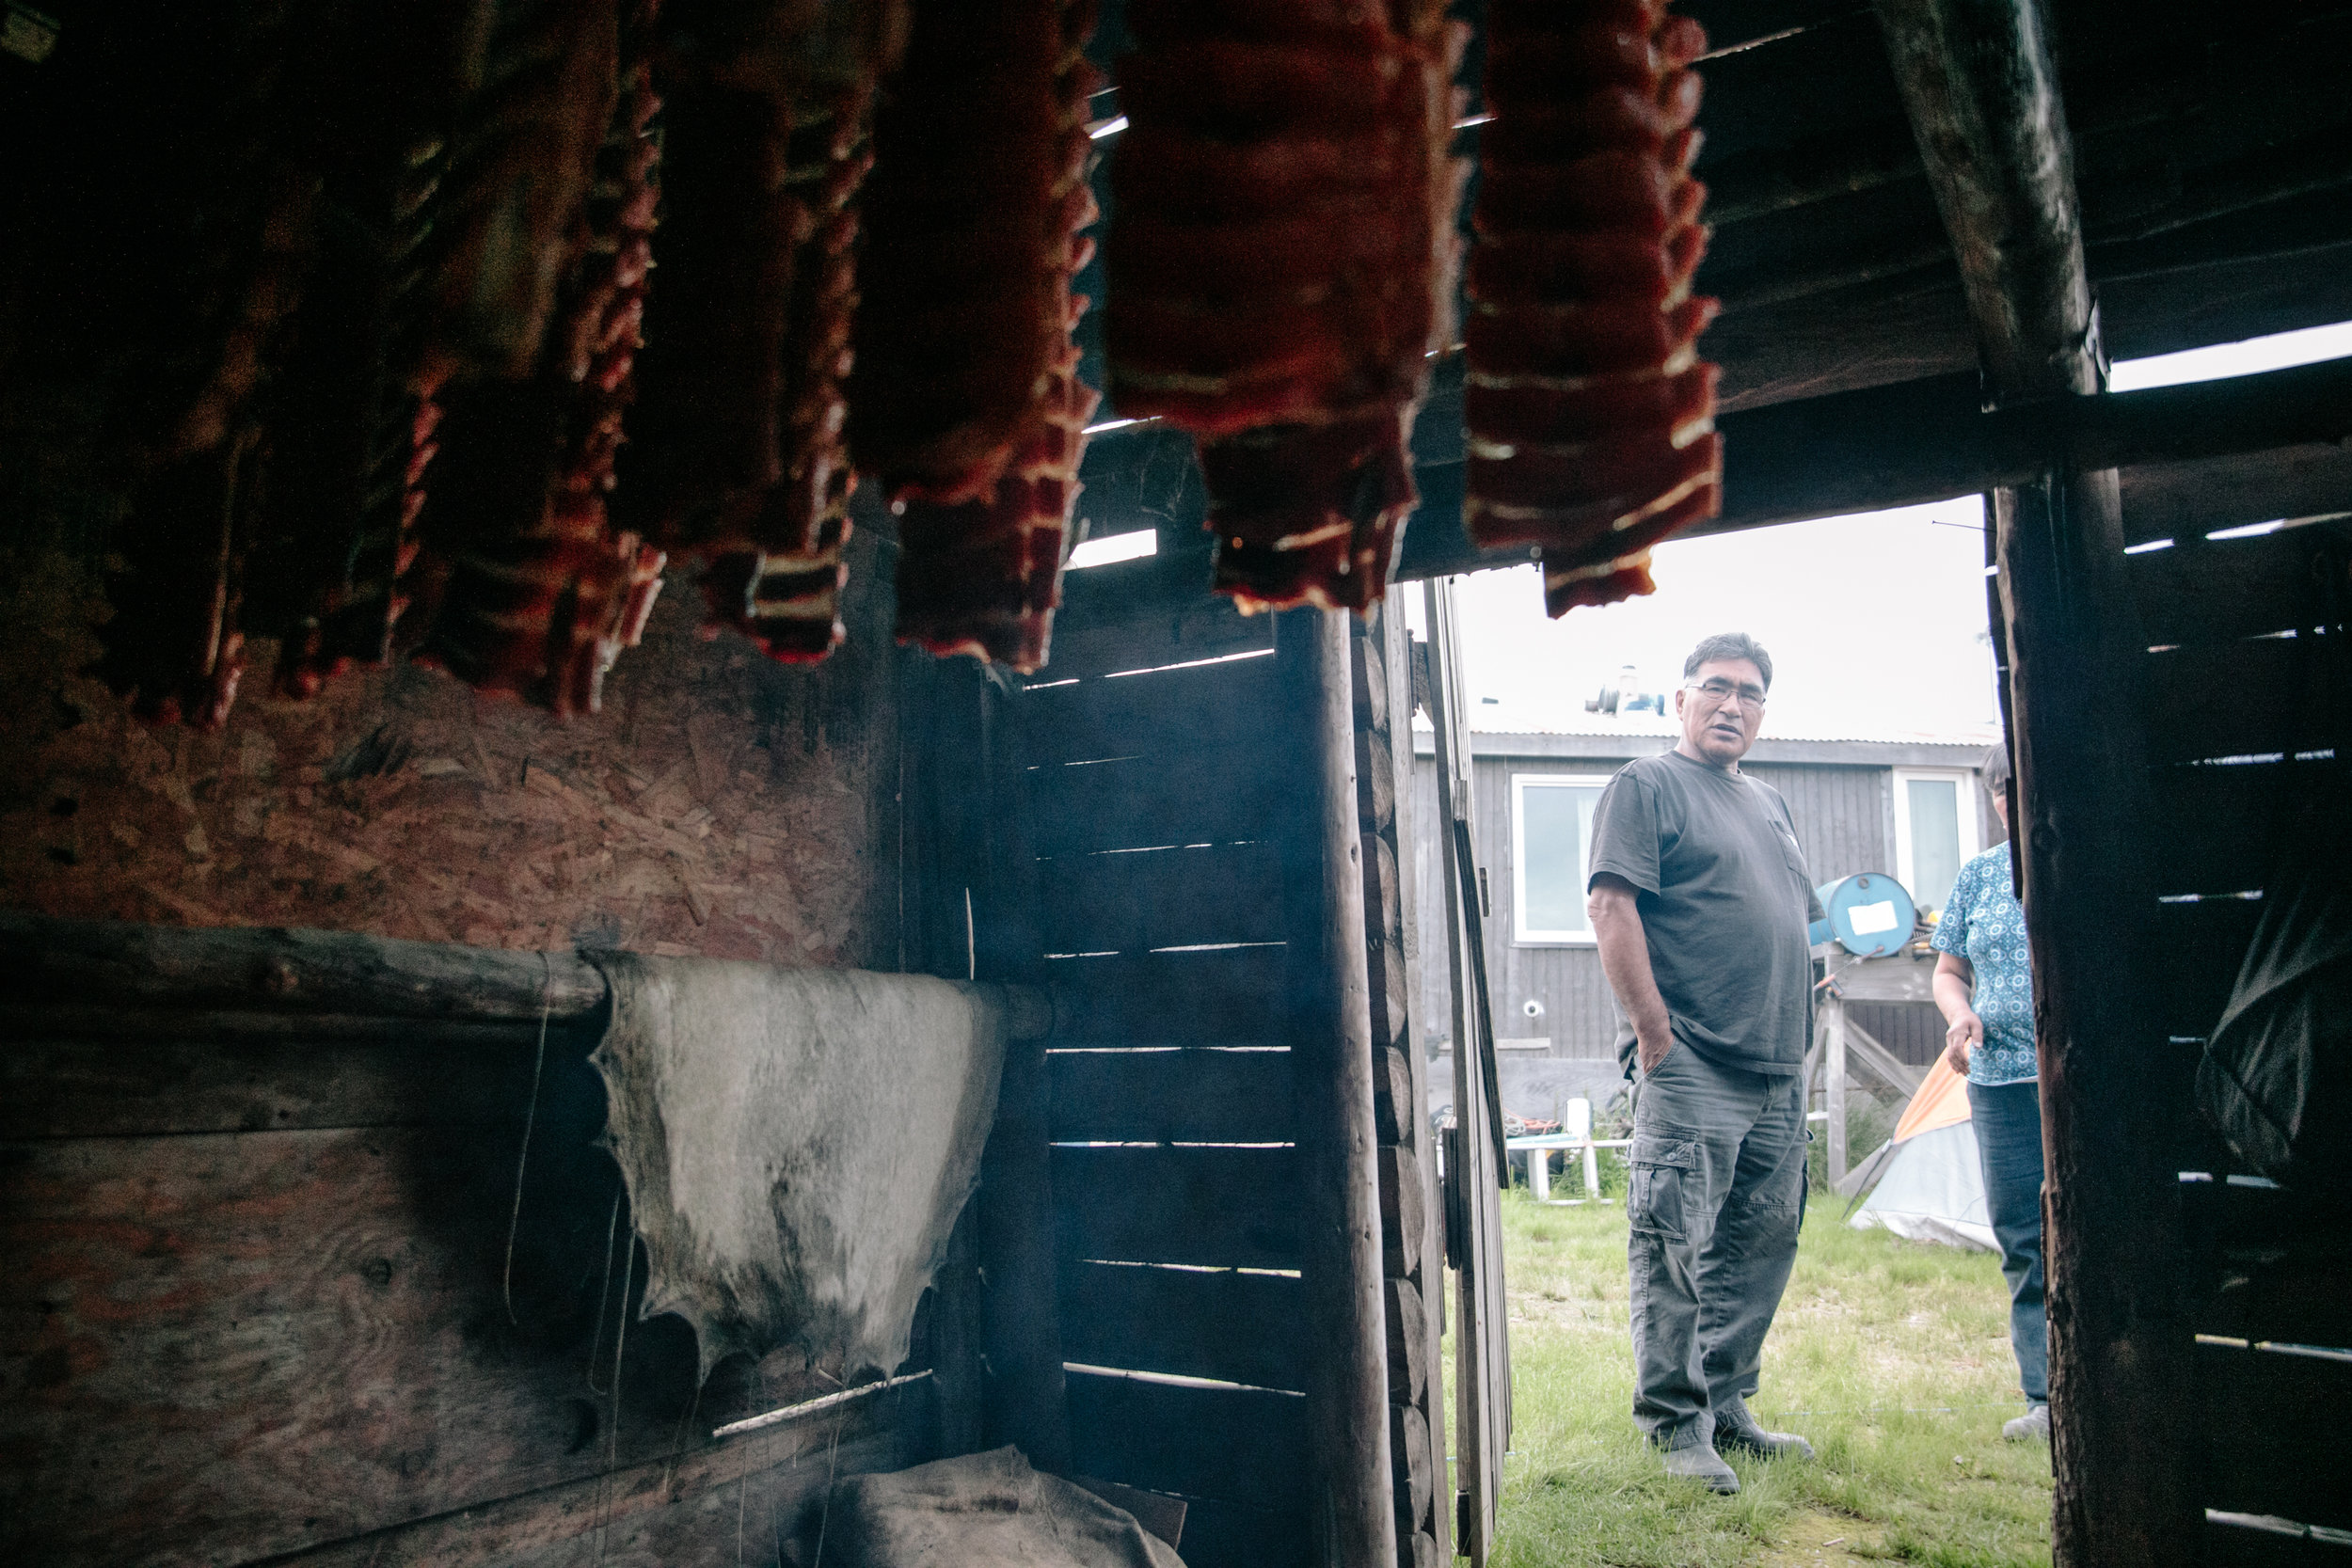  Photographs from a story with Salmonlife.org   “As the largest source of subsistence in Alaska, the Yukon is precious to many people and provides for over 50 Alaska Native tribes. Many of these tribal members, however, live without easy access to co